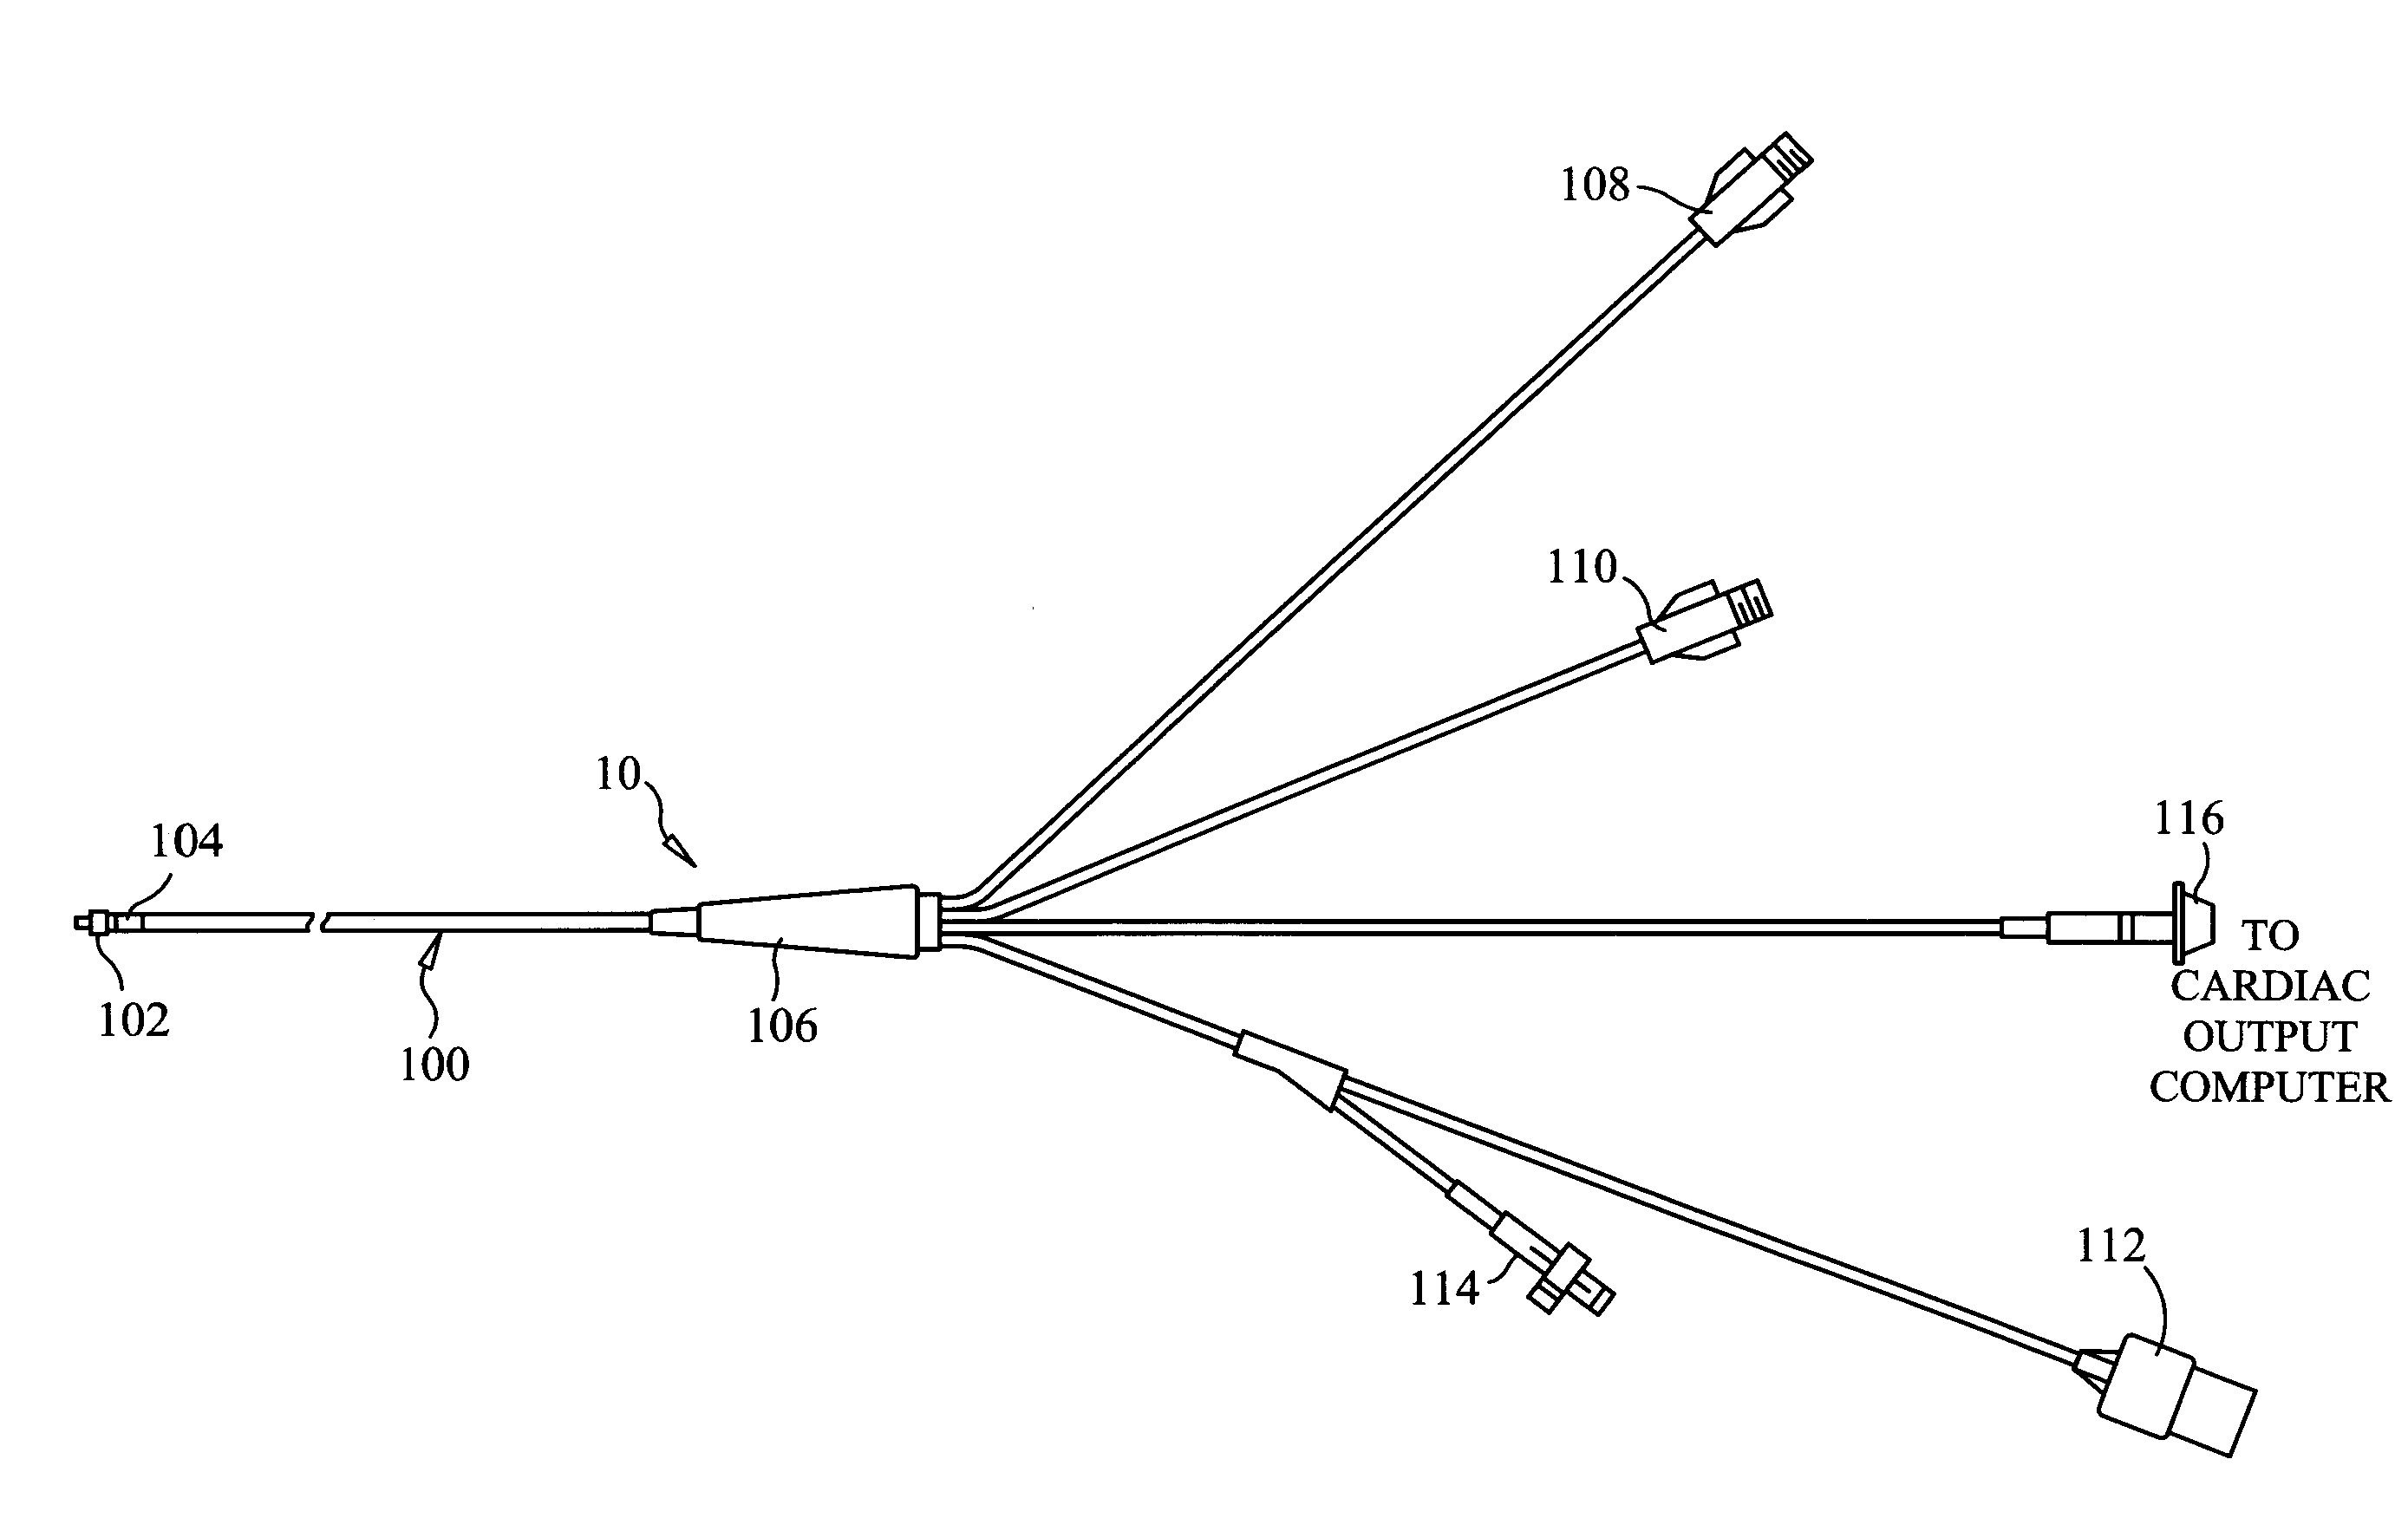 Thermodilution catheter having a safe, flexible heating element